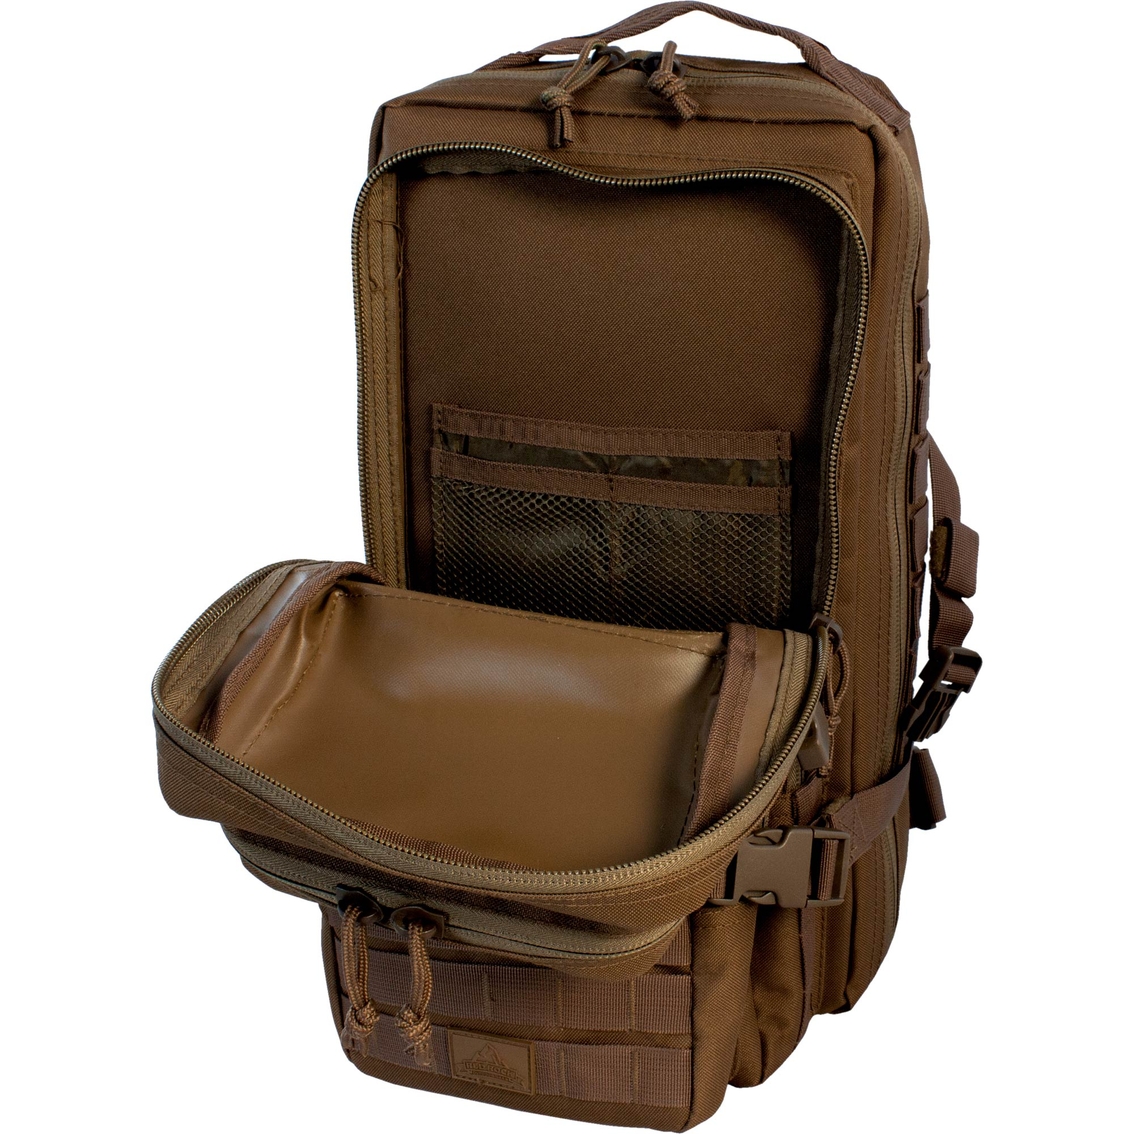 Red Rock Outdoor Gear Assault Pack - Image 6 of 7